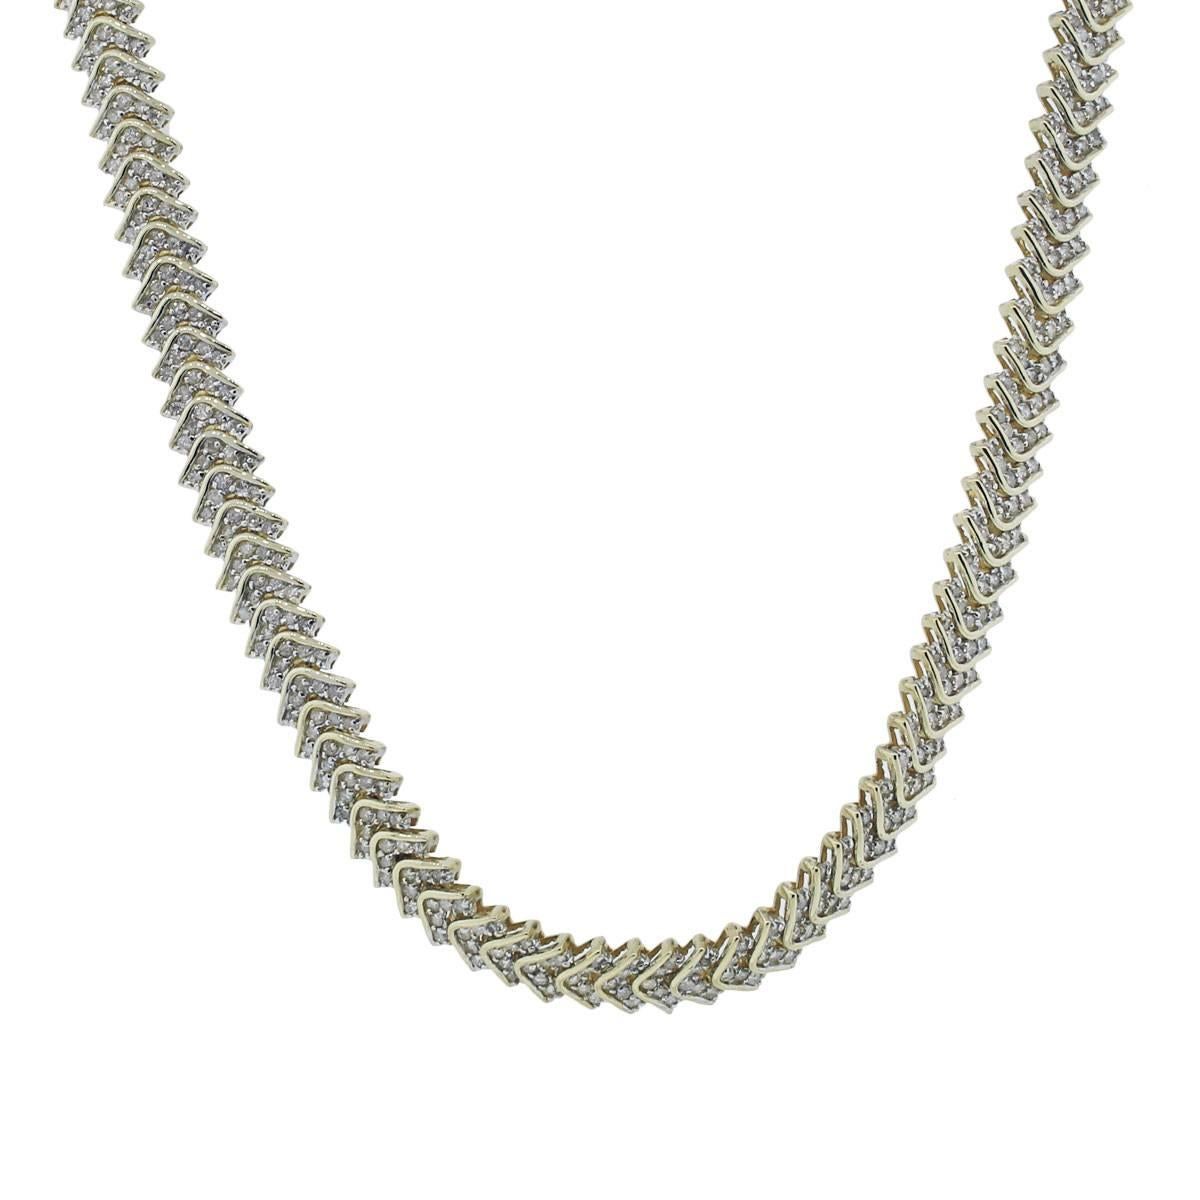 Style: 14k Yellow Gold 5.5ctw Diamond Chevron Necklace
Material: 14k Yellow Gold
Diamond Details: Approximately 5.5ctw of Round Brilliant Diamonds, H/I in color and SI in clarity
Total Weight: 81.3g (52.3dwt)
Necklace Length: 17.25